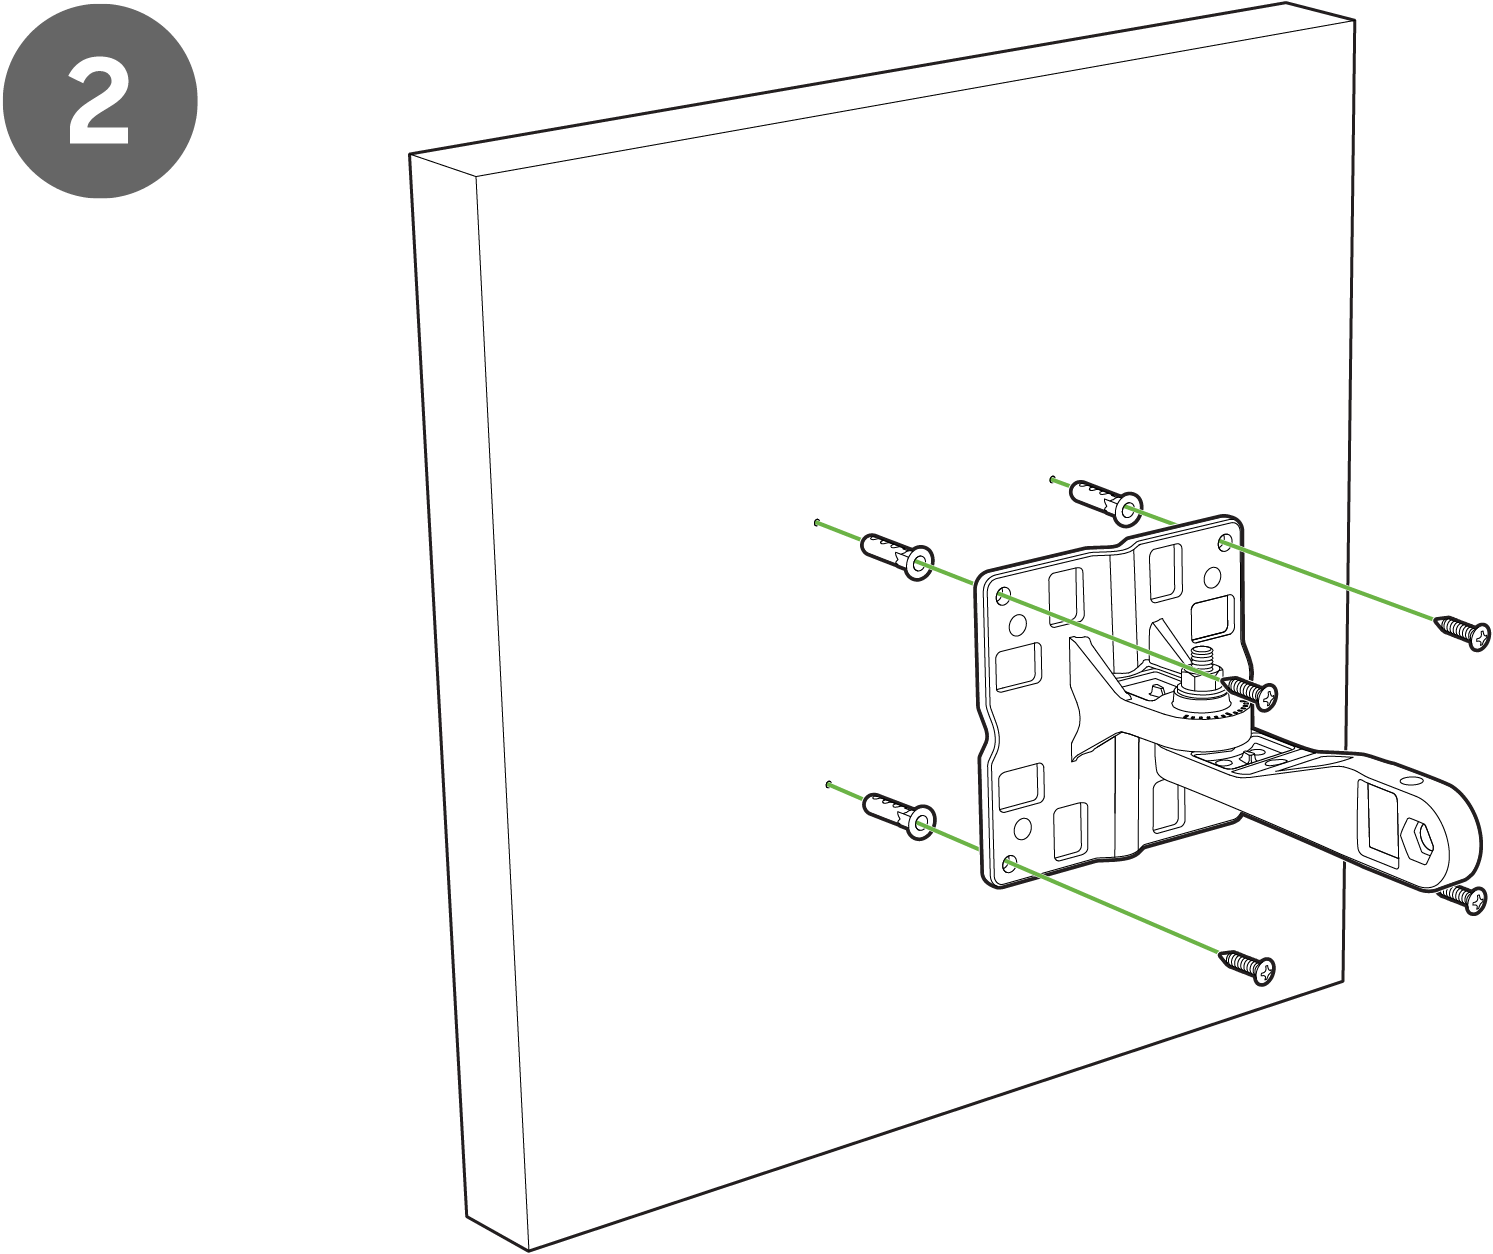 Image showing attachment of the wall mounting flange to the wall or ceiling using four M6 screws through the holes in the bracket